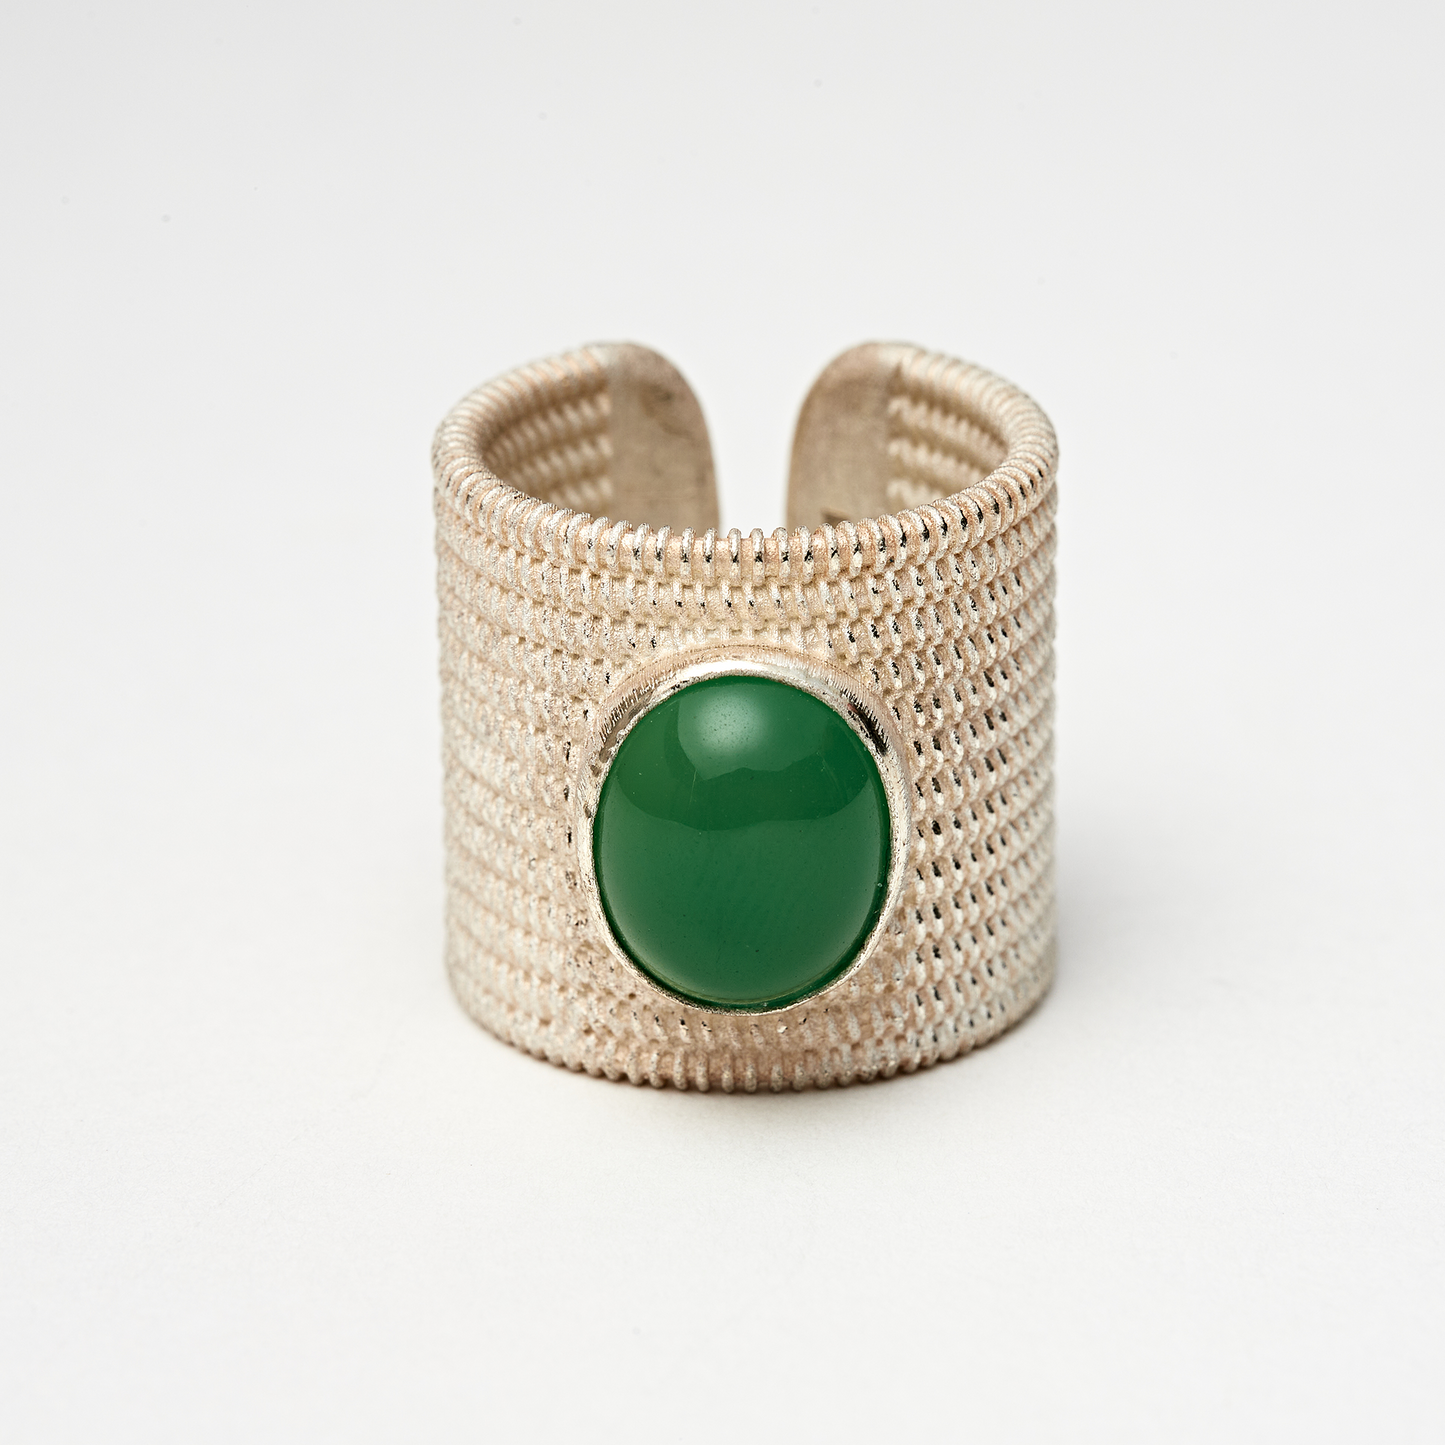 Woven Inlay Ring "Emerald" - [所若Seriouslynew]